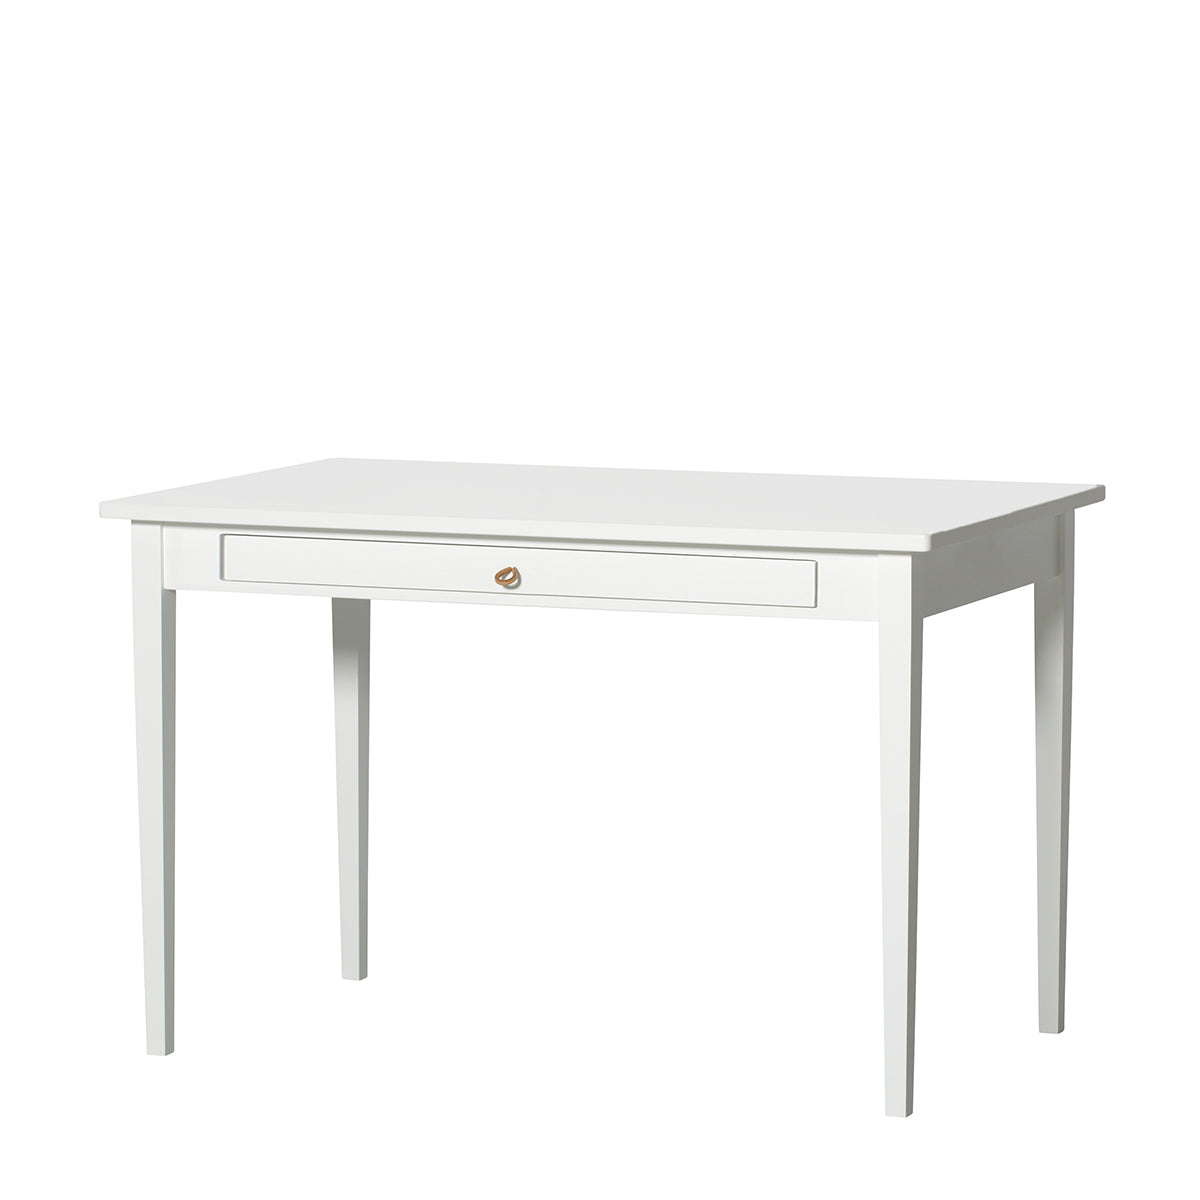 Table / table junior Oliver Furniture